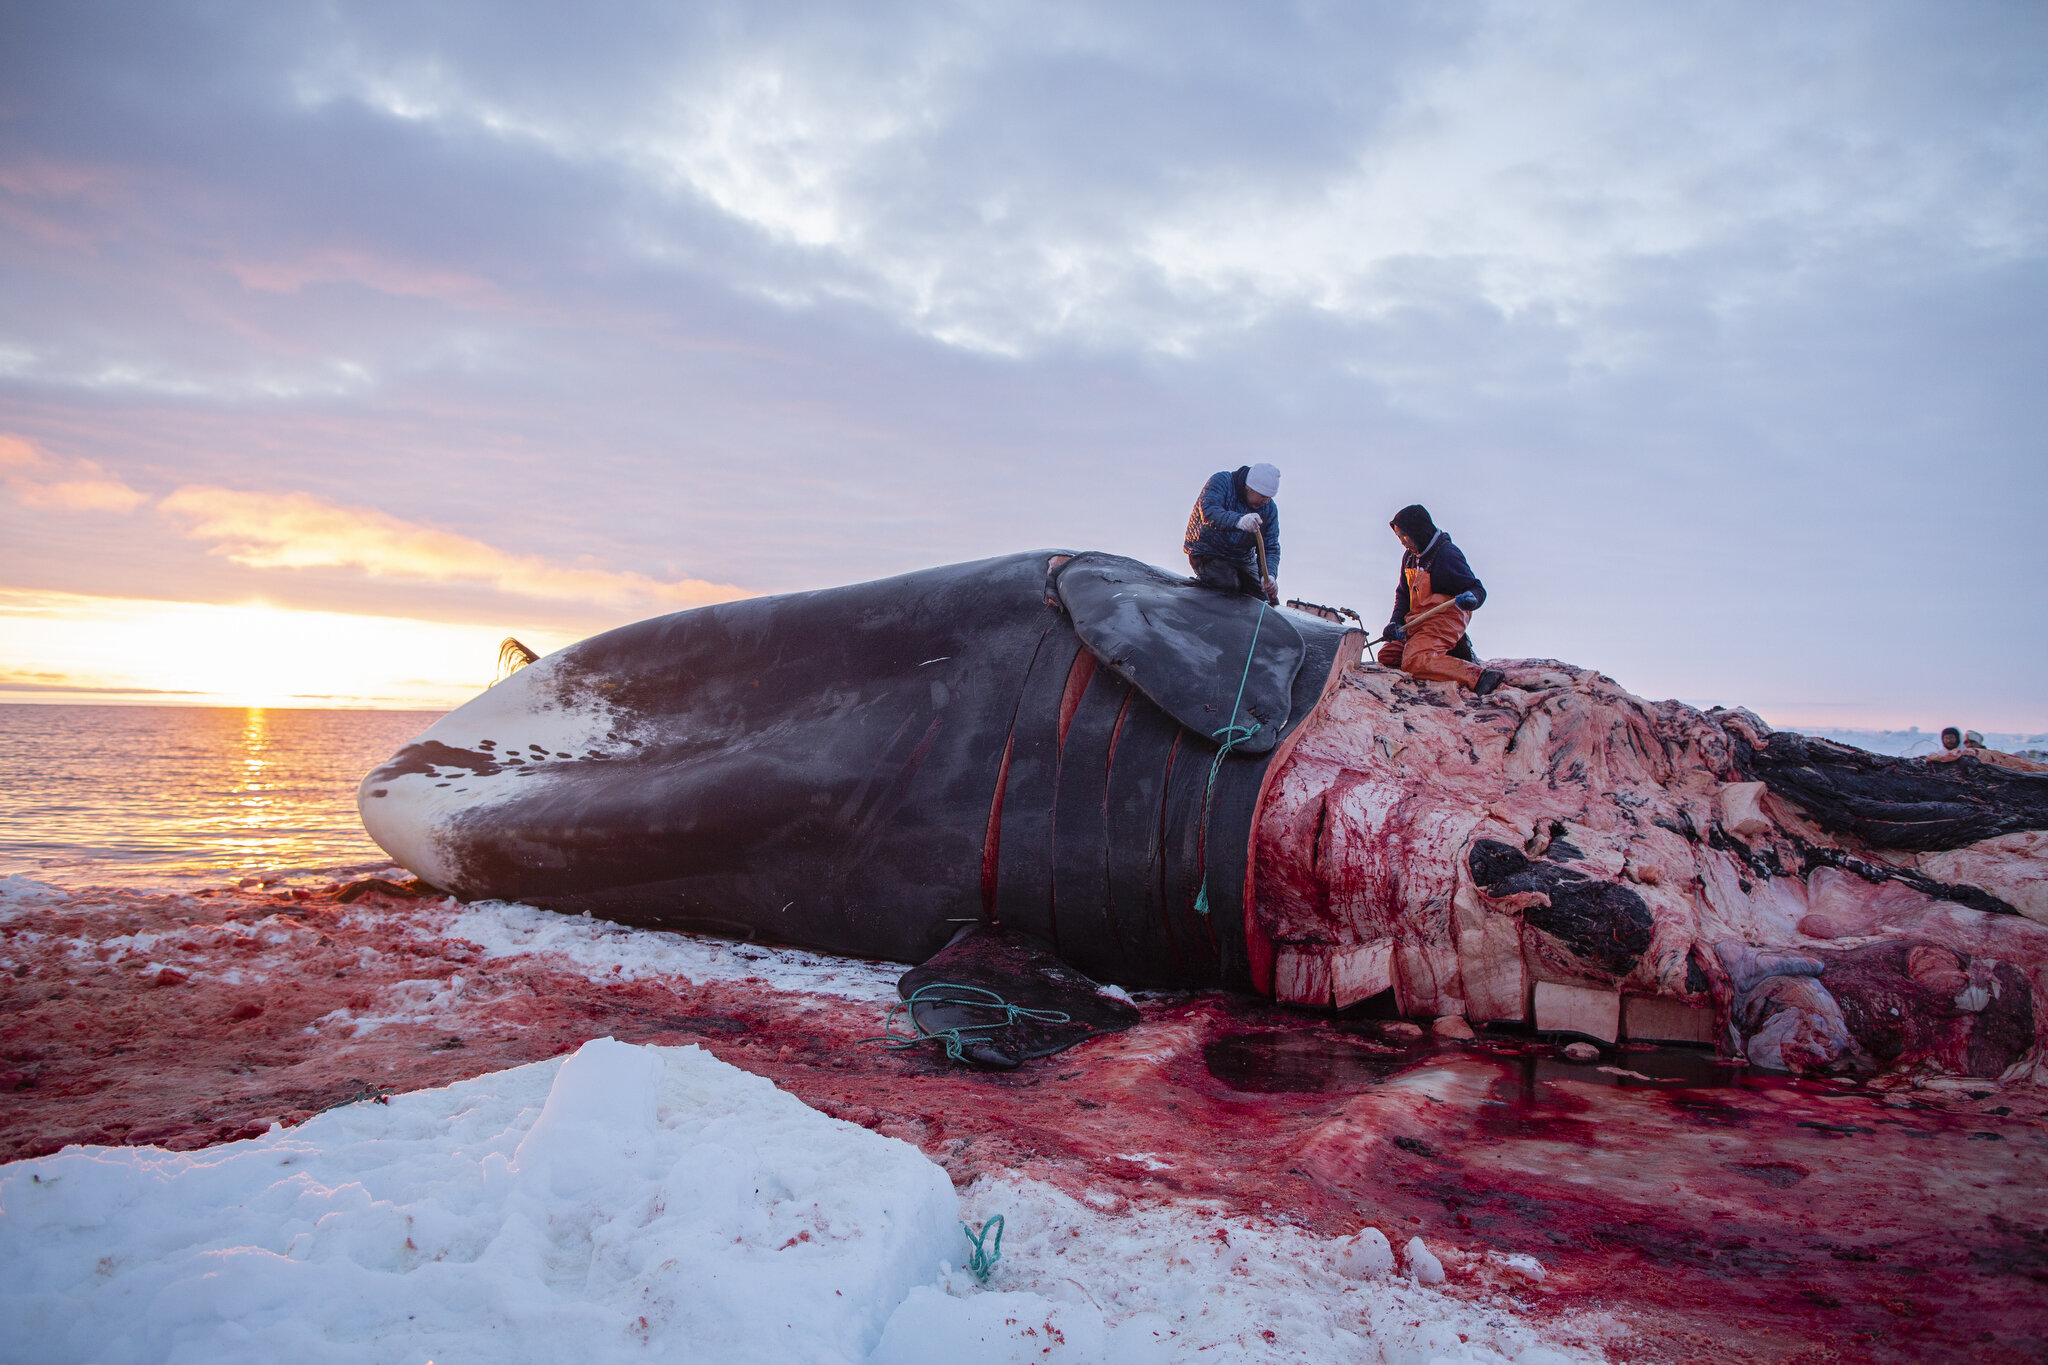  A roughly fifty-foot bowhead whale is caught during spring whaling in Utqiaġvik, Alaska. May 5th, 2016. Almost the entire village of Utqiaġvik participates in the annual spring whale hunt in some way, either as part of a whaling crew or assisting th